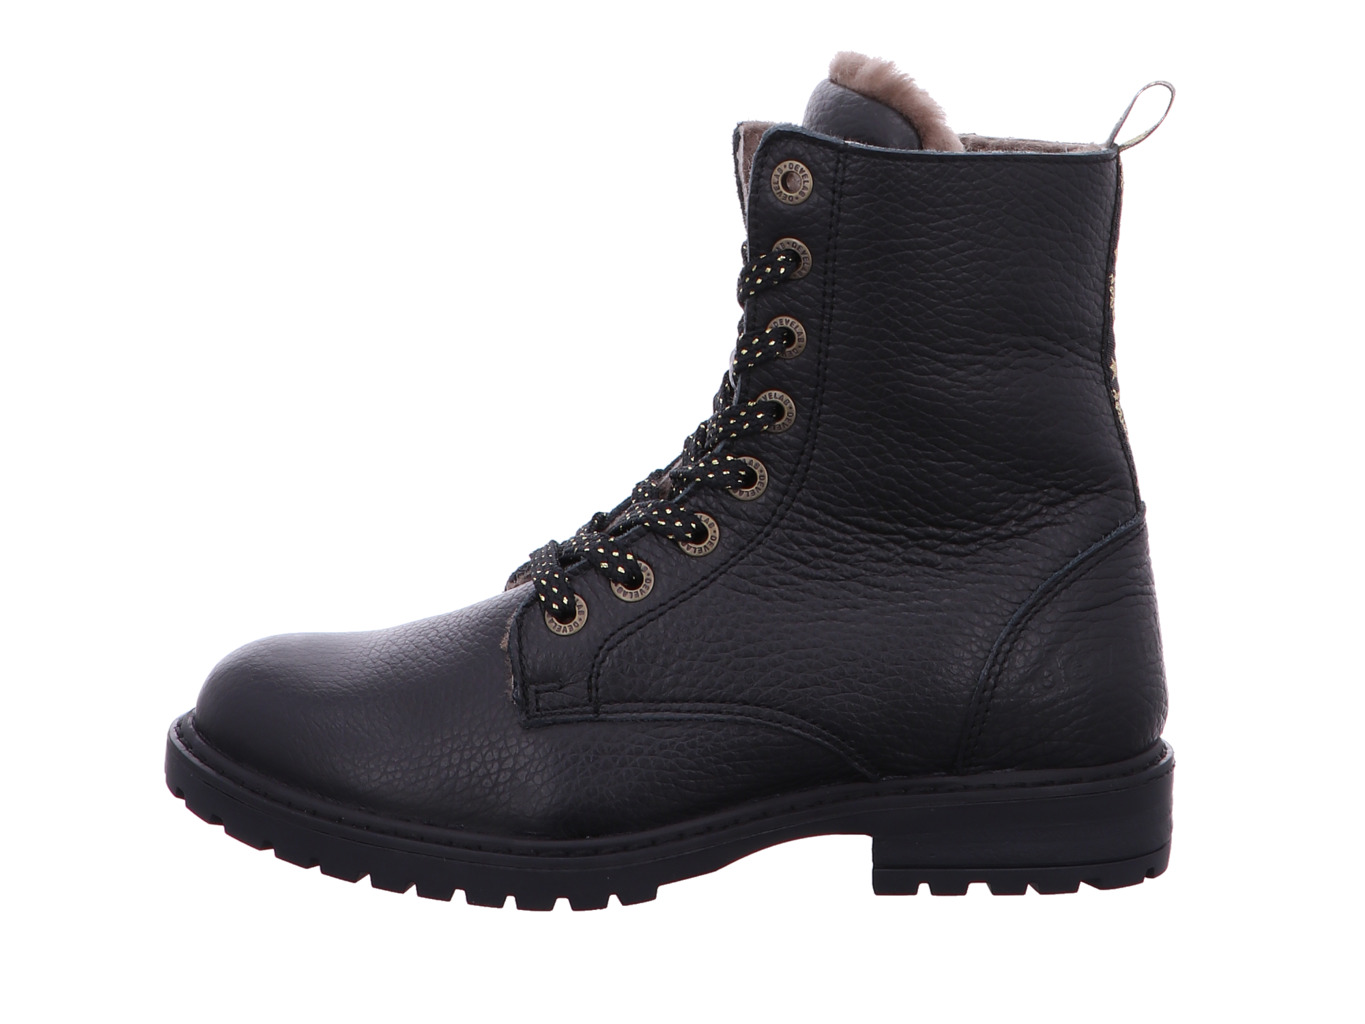 develab_girls_mid_boot_laces_42846_922_3155